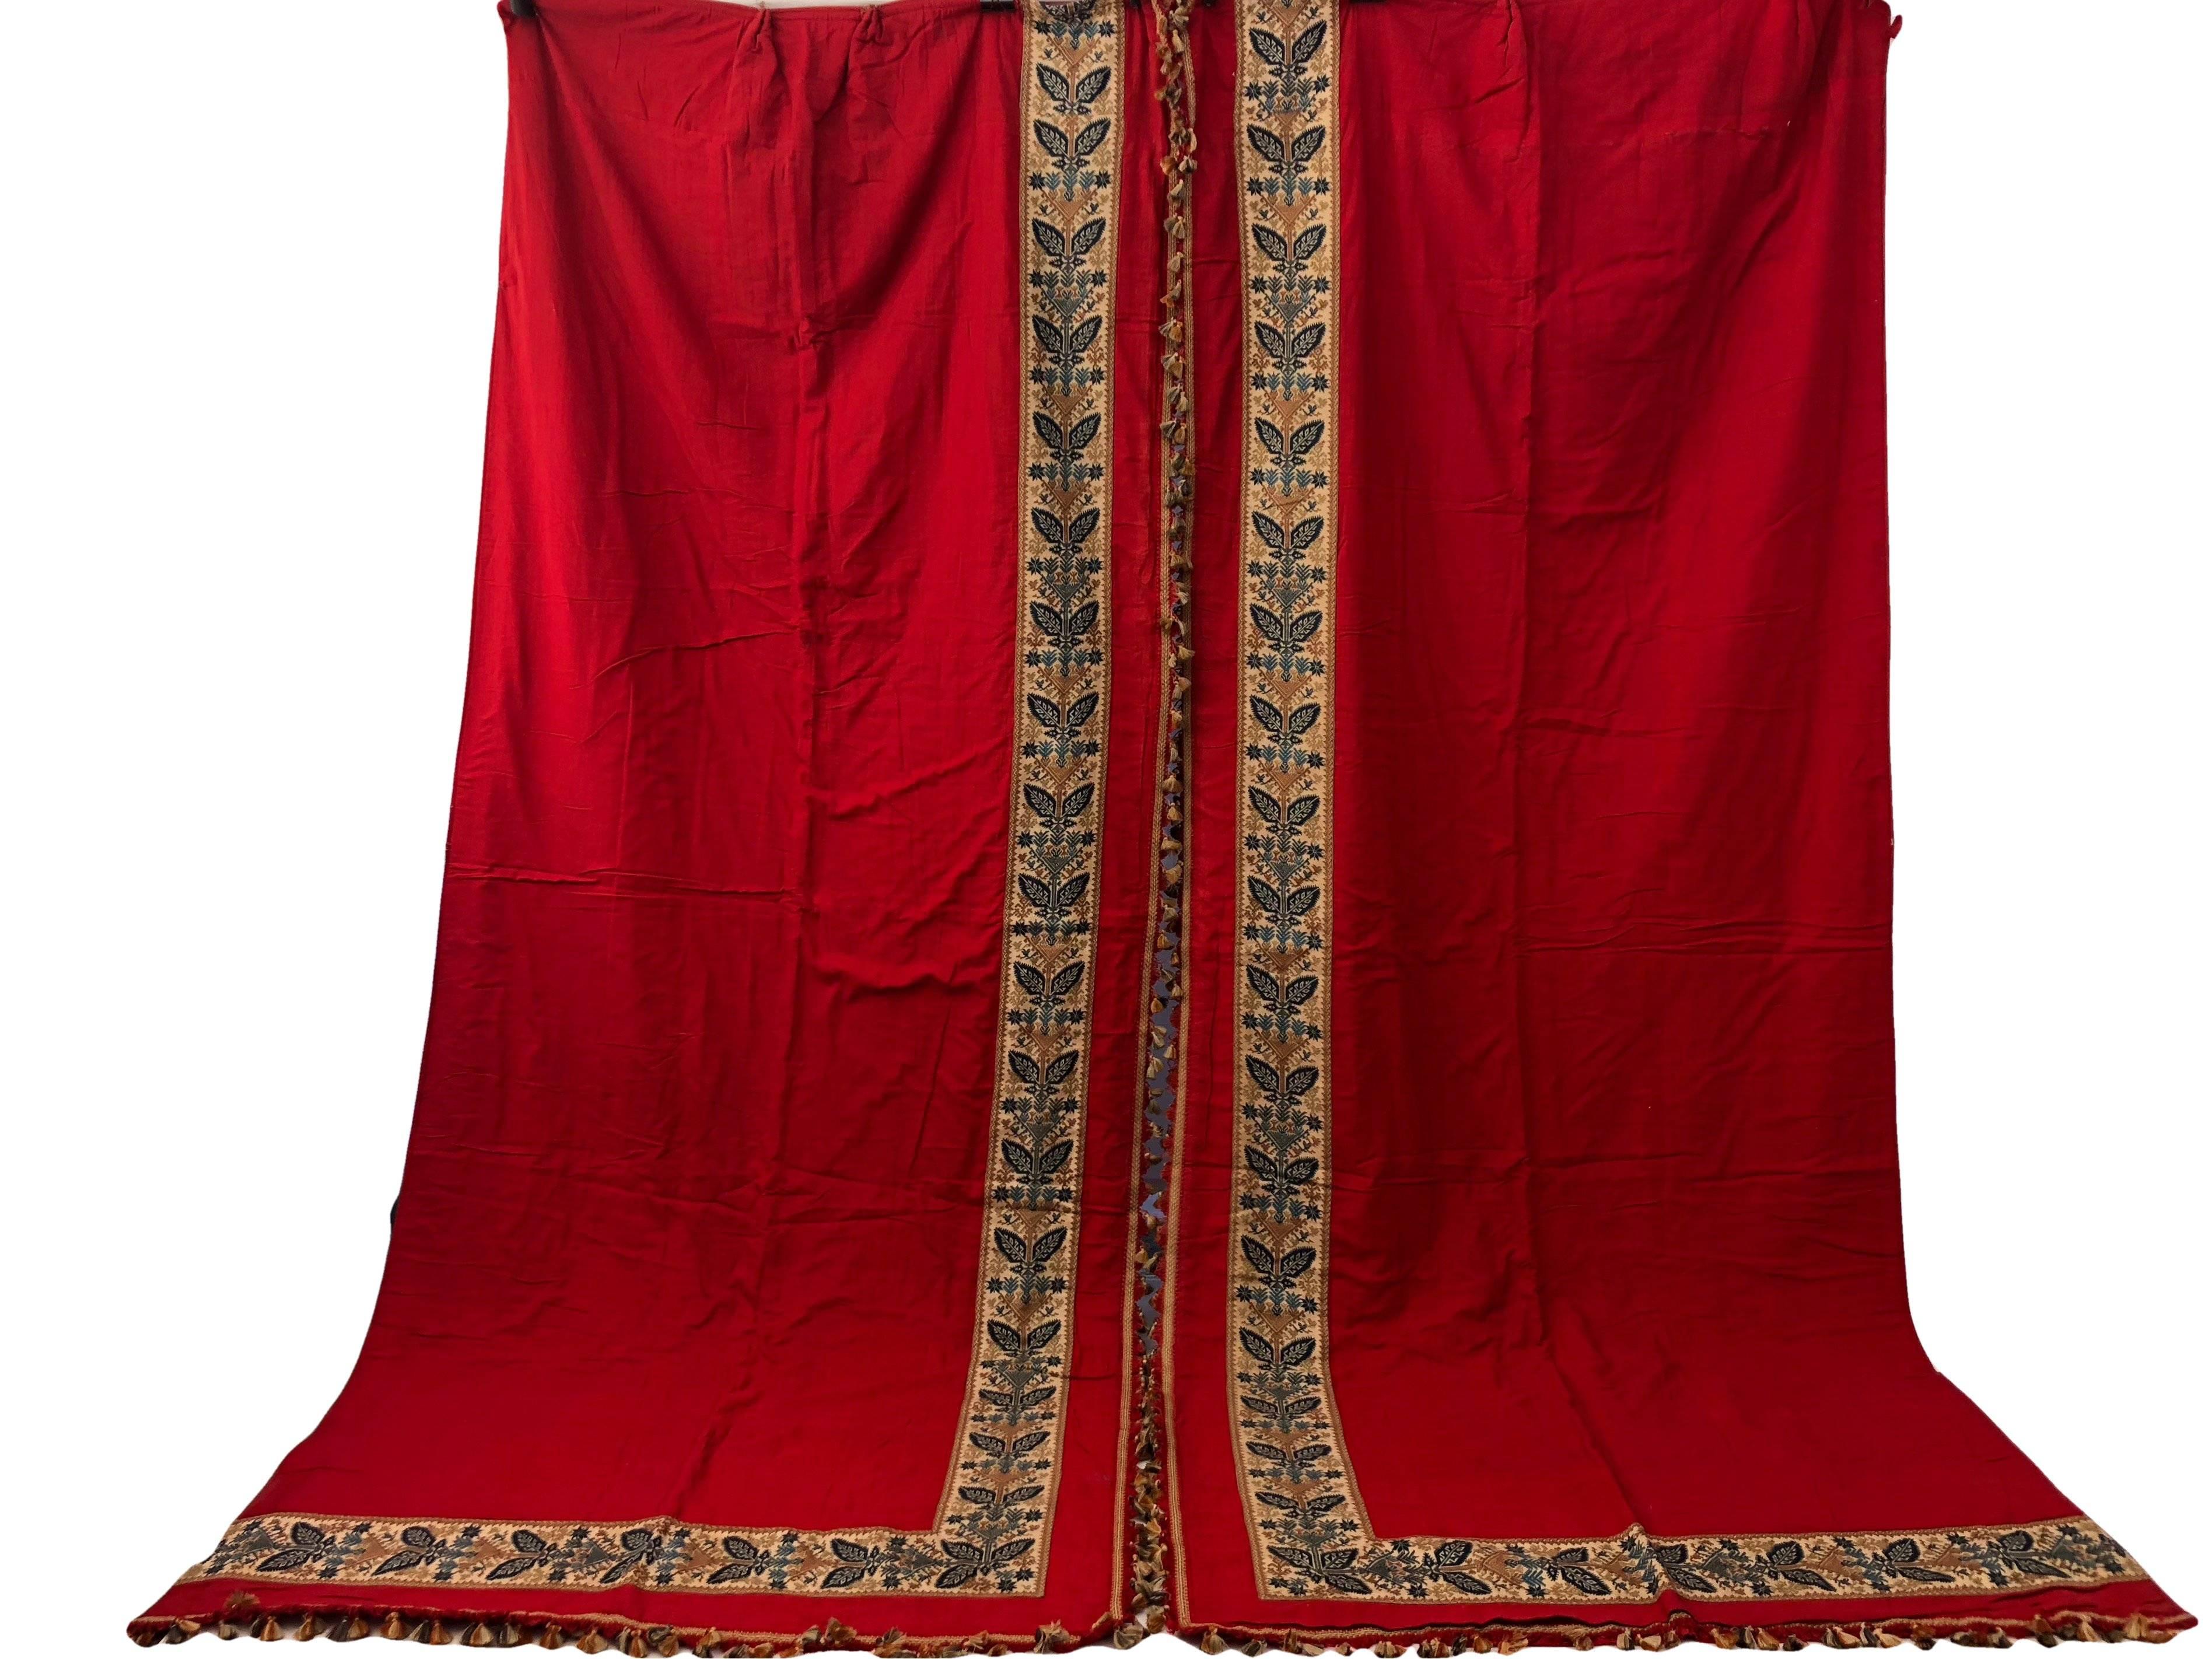 This is a beautiful set of French padded red curtains with a gorgeous weaved trim and fringe tassels. The color is a rich, elegant red and the trim band is wide and multicolored with a blue and tan motif. The tassels are multicolored in red, tan and